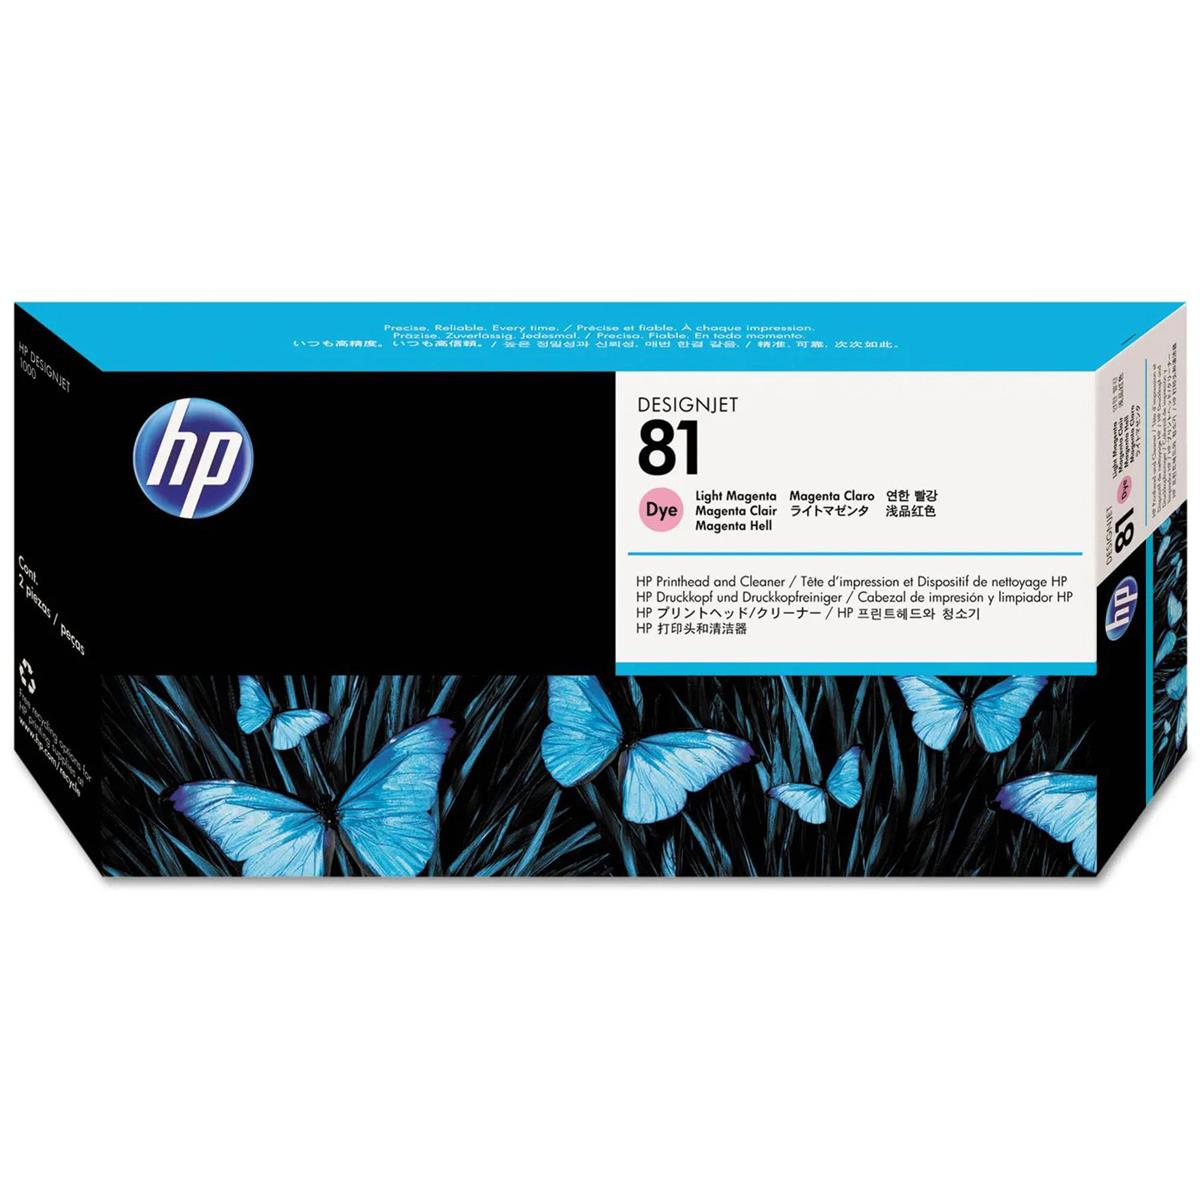 

HP C4955A 81 Light Magenta Dye Printhead and Cleaner